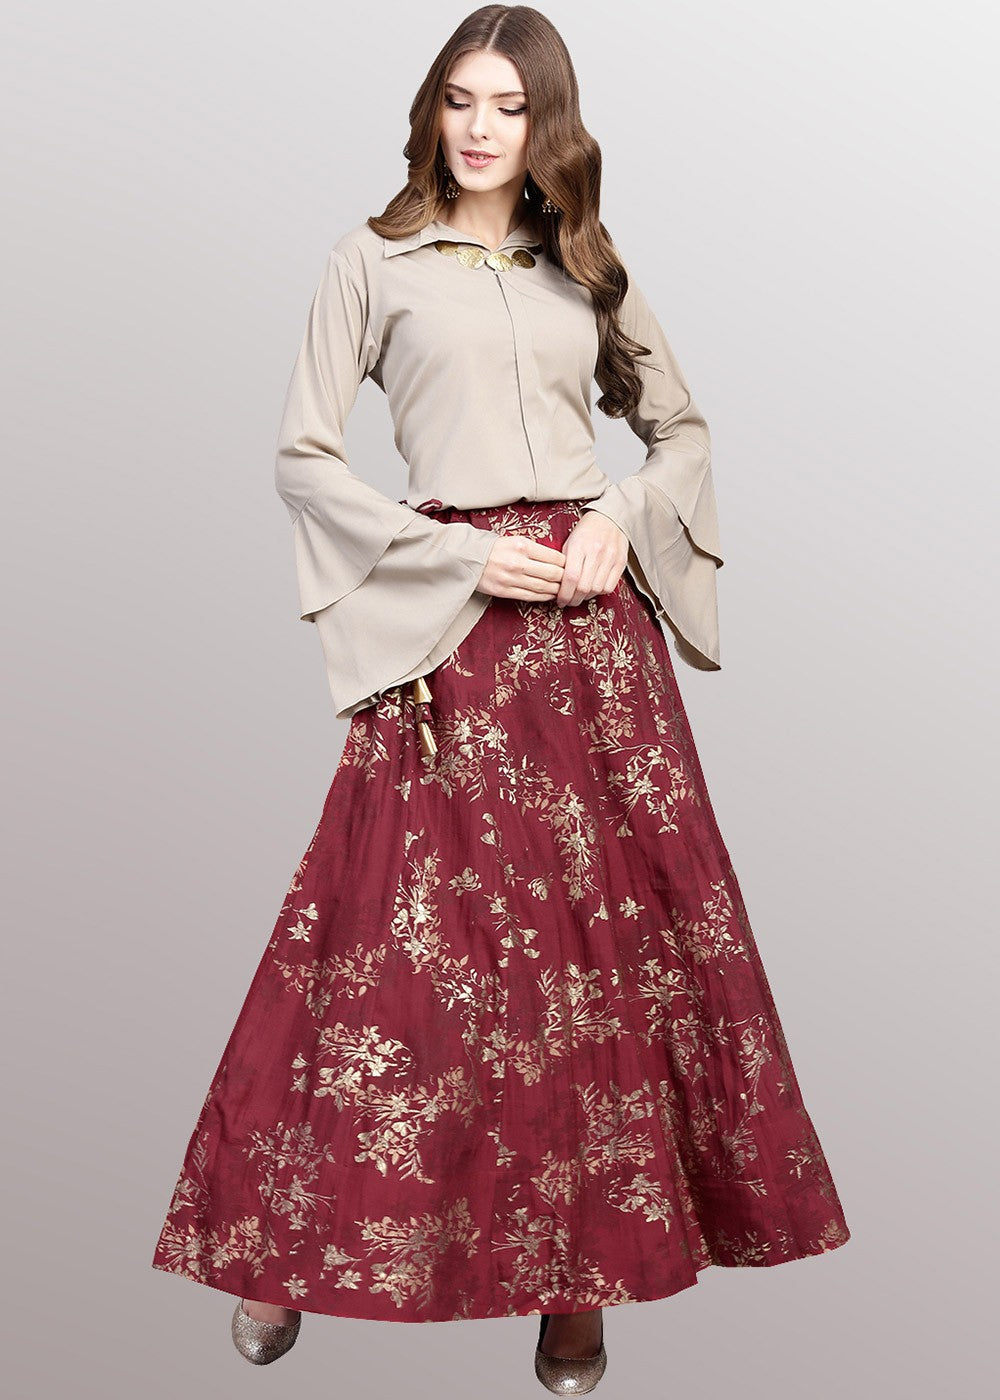 Beige Readymade Shirt With Maroon Skirt